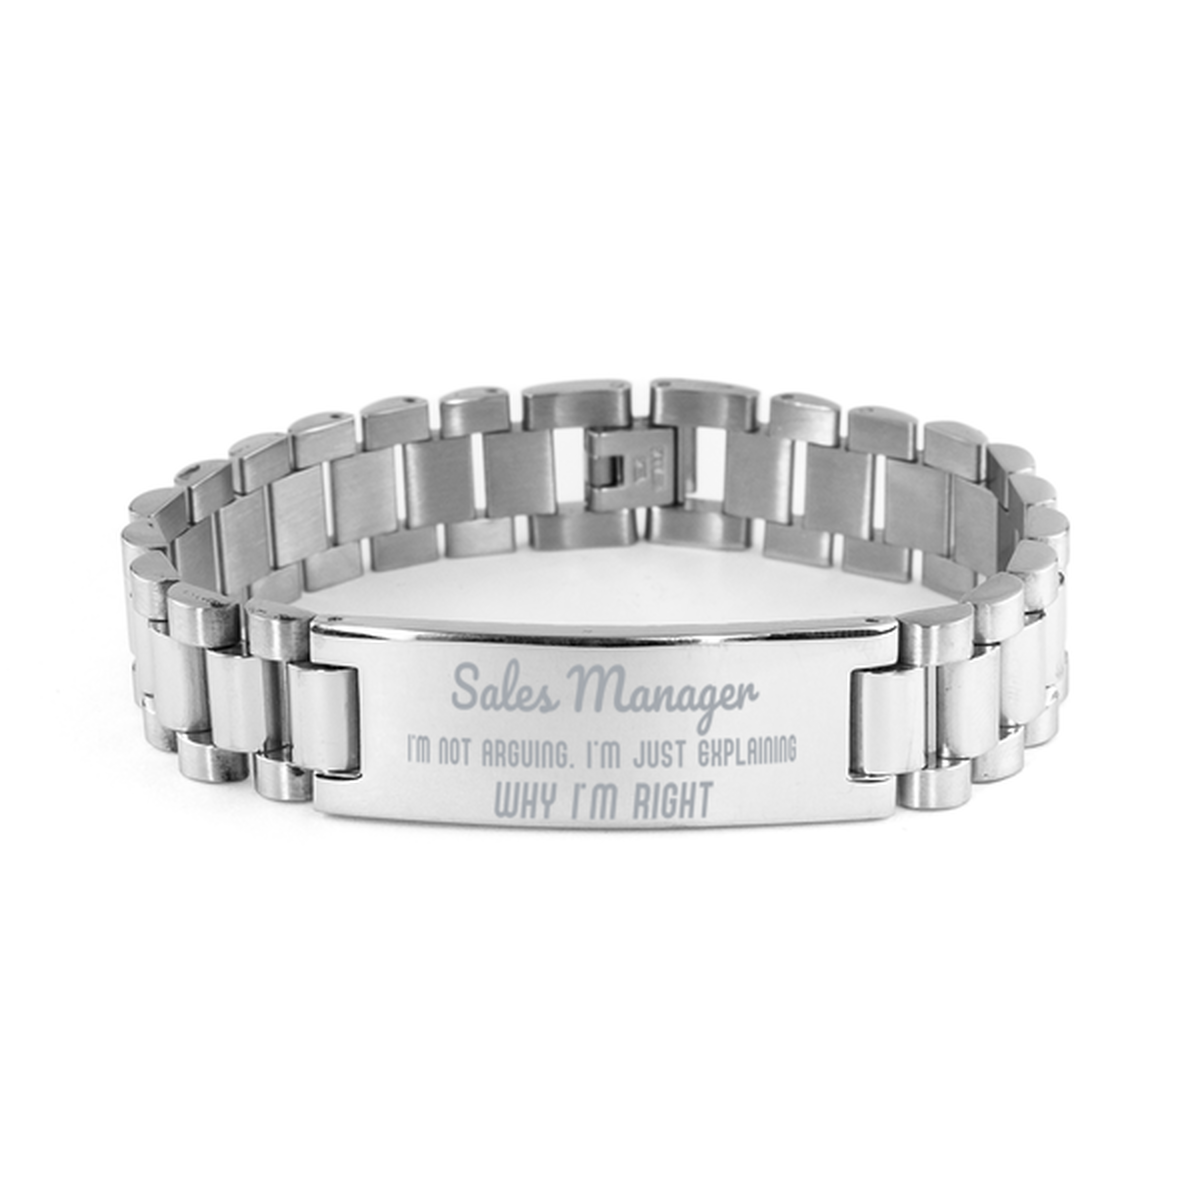 Sales Manager I'm not Arguing. I'm Just Explaining Why I'm RIGHT Ladder Stainless Steel Bracelet, Graduation Birthday Christmas Sales Manager Gifts For Sales Manager Funny Saying Quote Present for Men Women Coworker